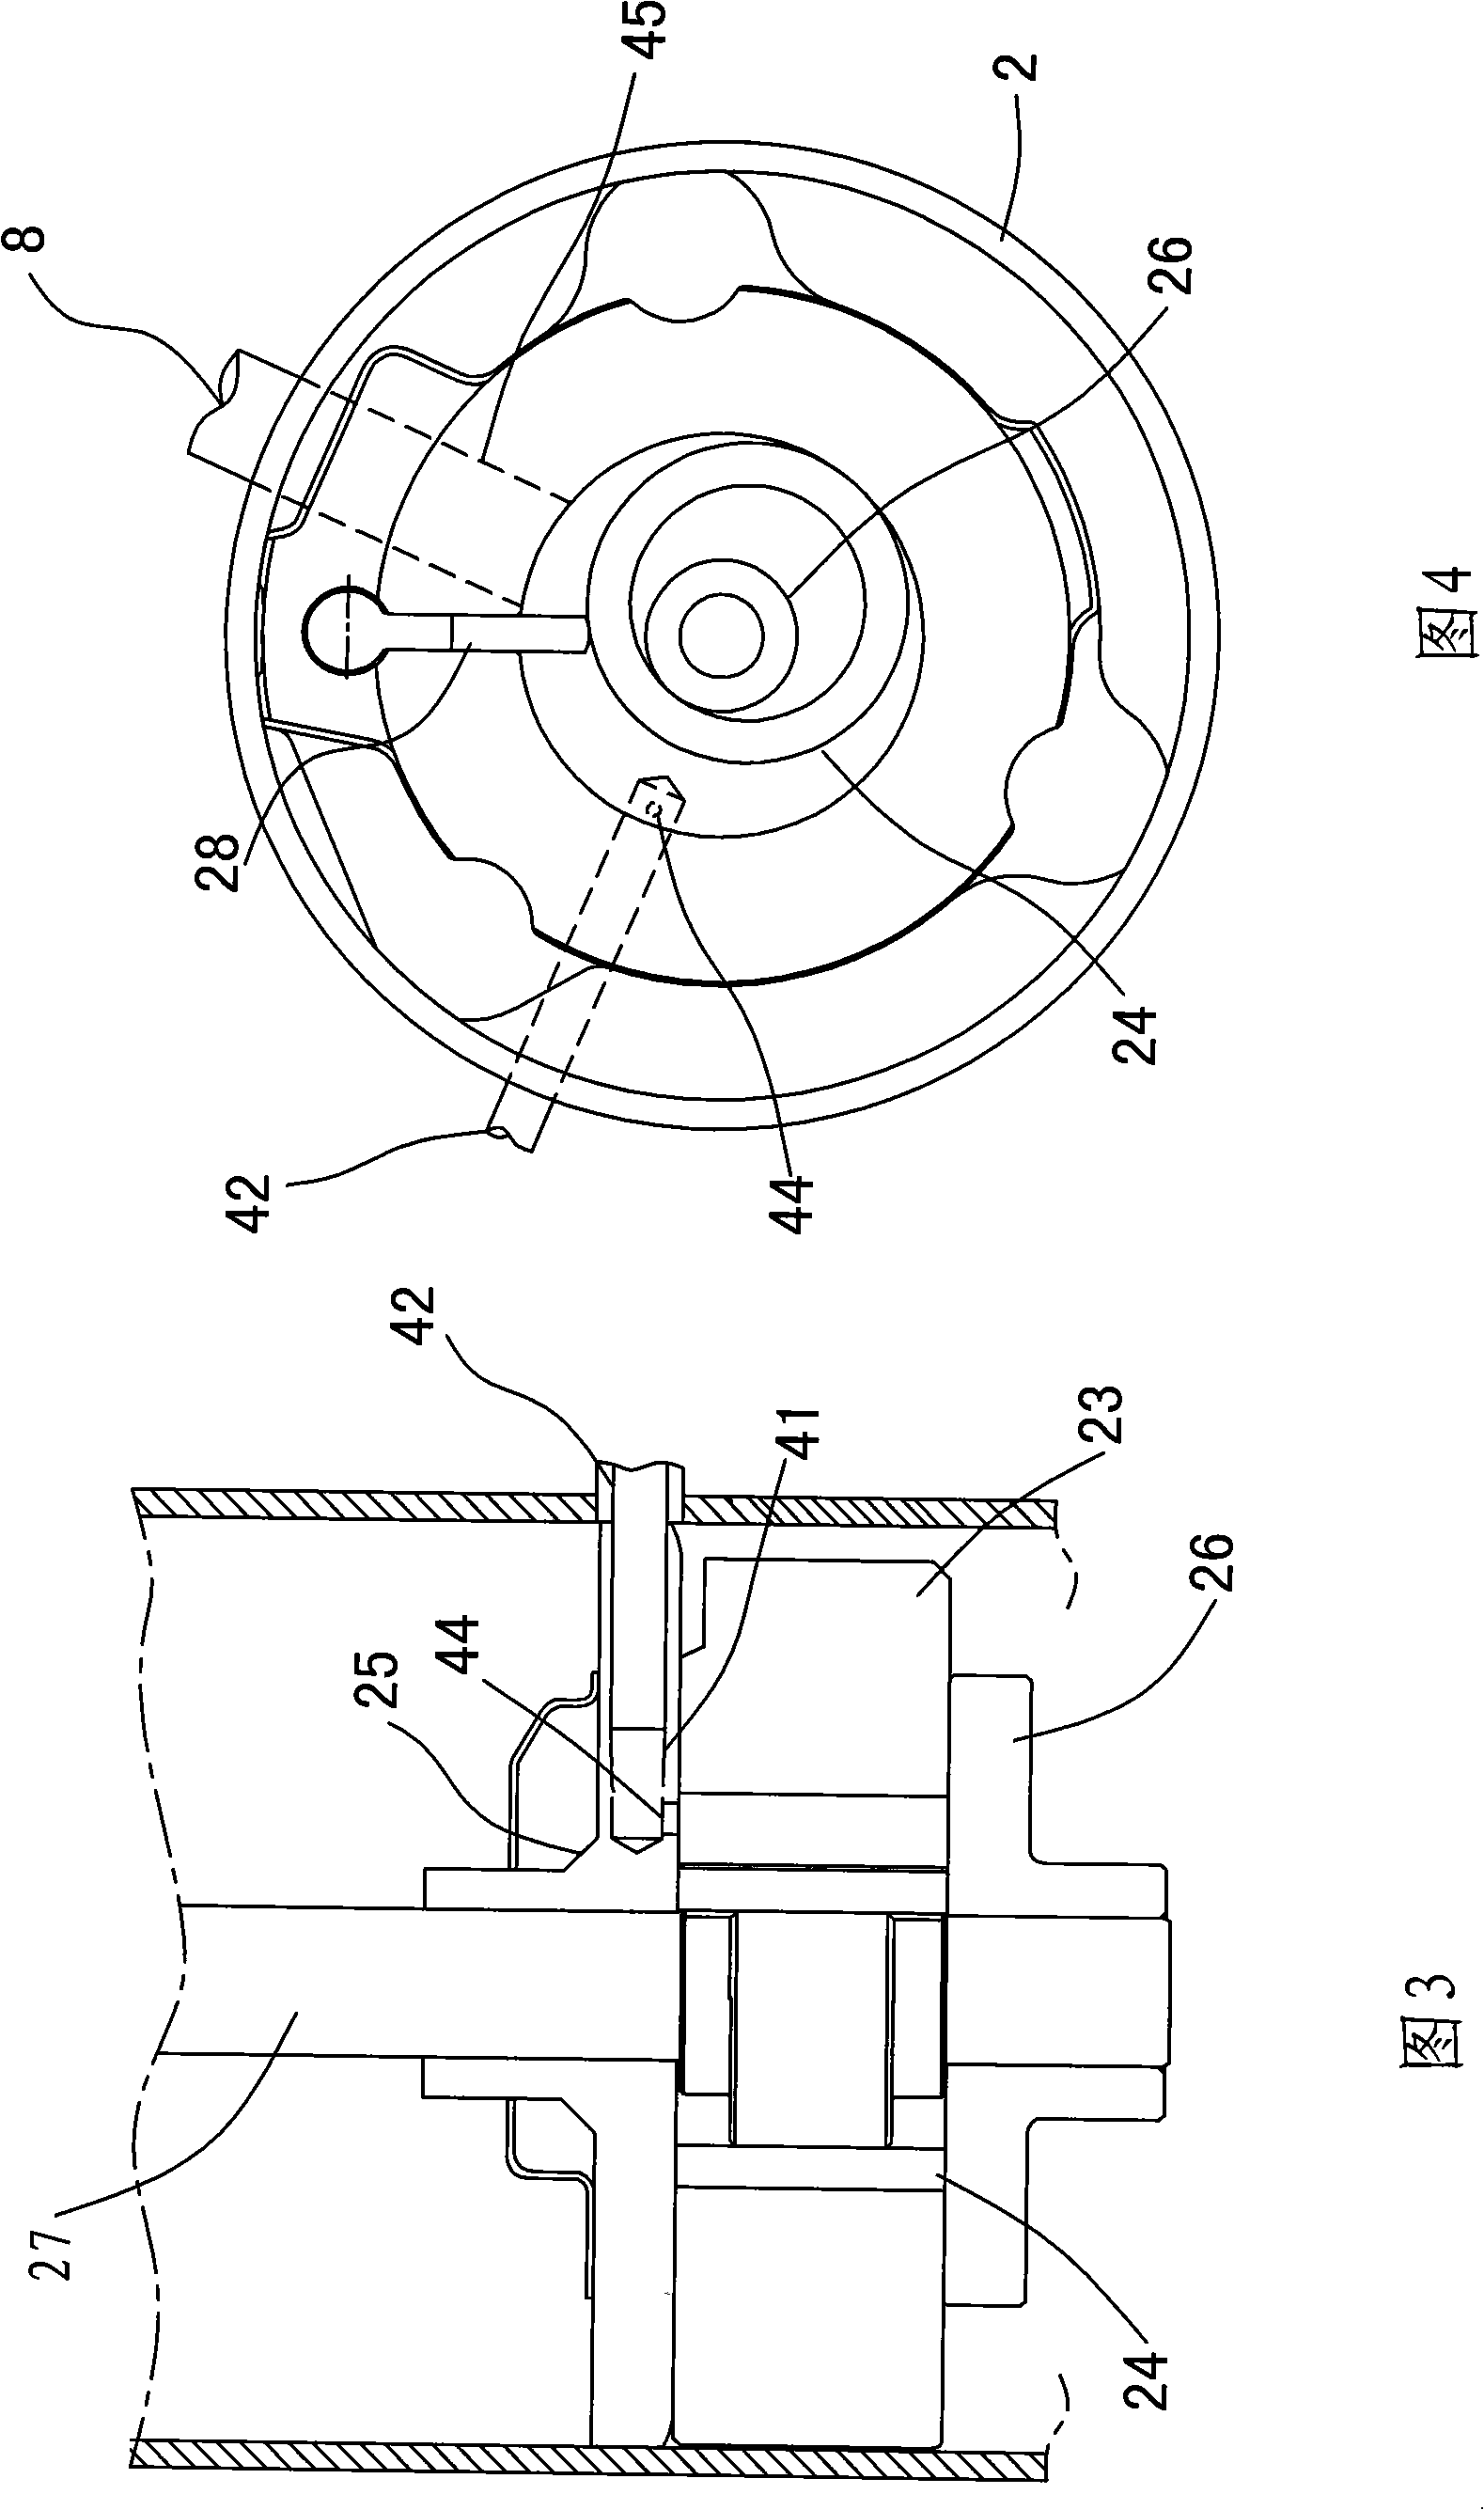 Compressor exhaust temperature control device and its control method and applications